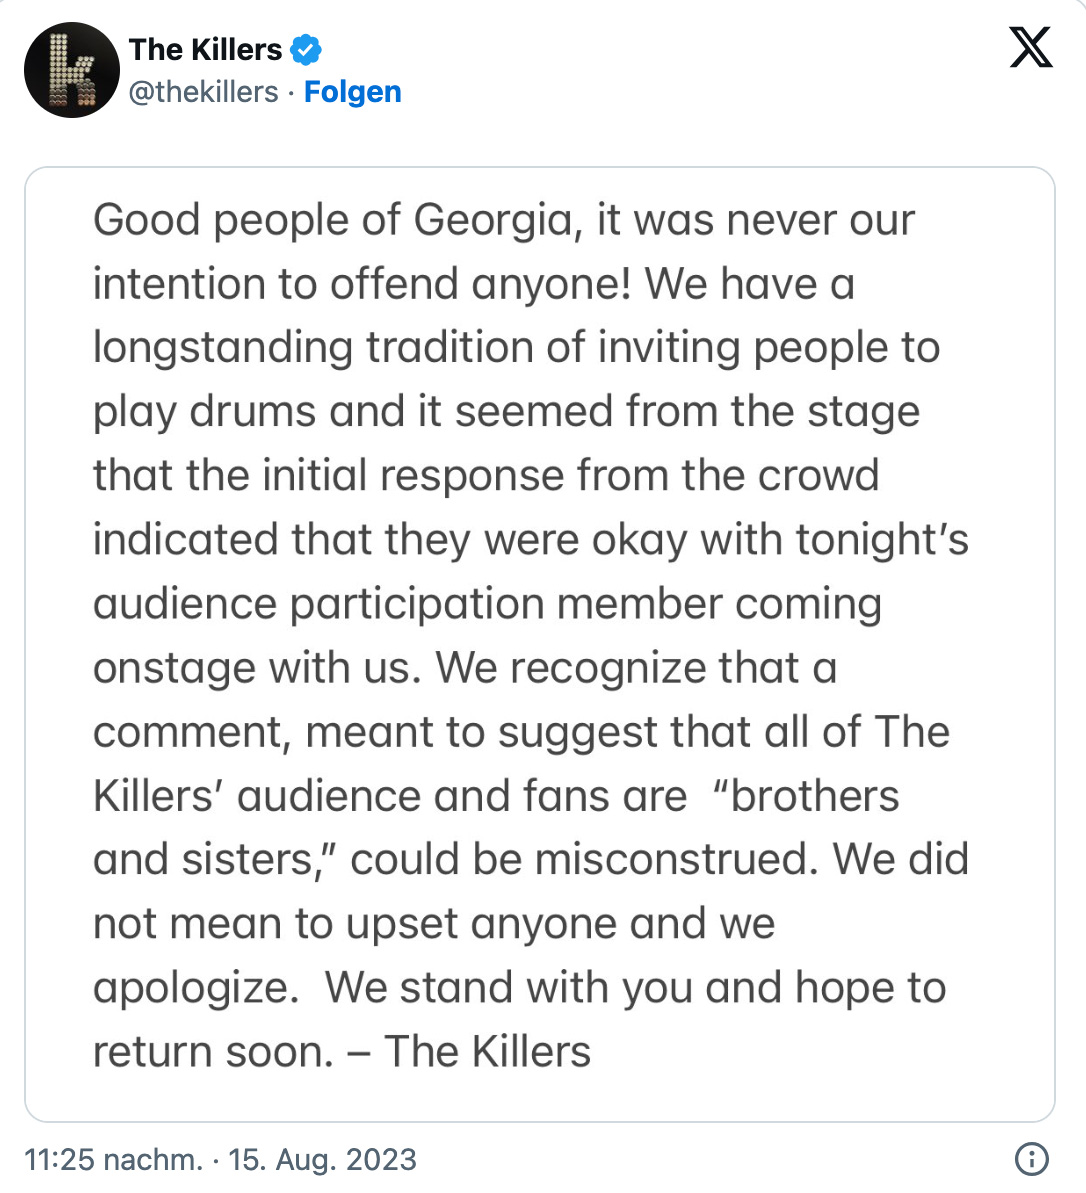 The Killers bei Twitter: Good people of Georgia, it was never our intention to offend anyone! We have a longstanding tradition of inviting people to play drums and it seemed from the stage that the initial response from the crowd indicated that they were okay with tonight